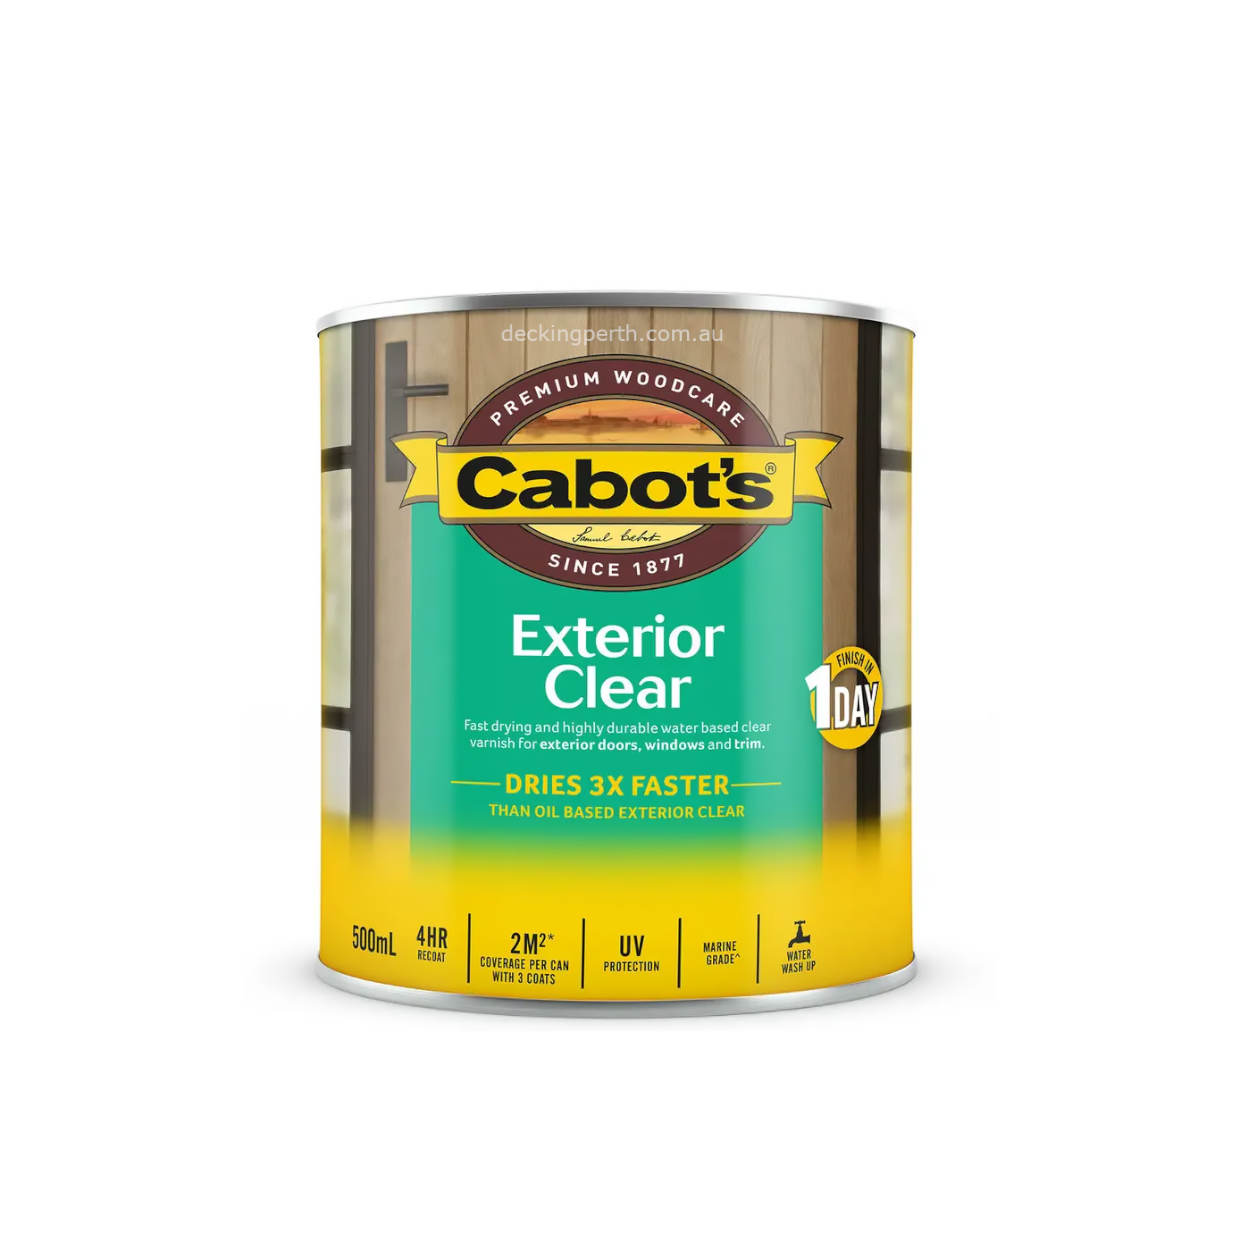 Cabots_Exterior_Clear_Water_Based_500ml_Decking_Perth